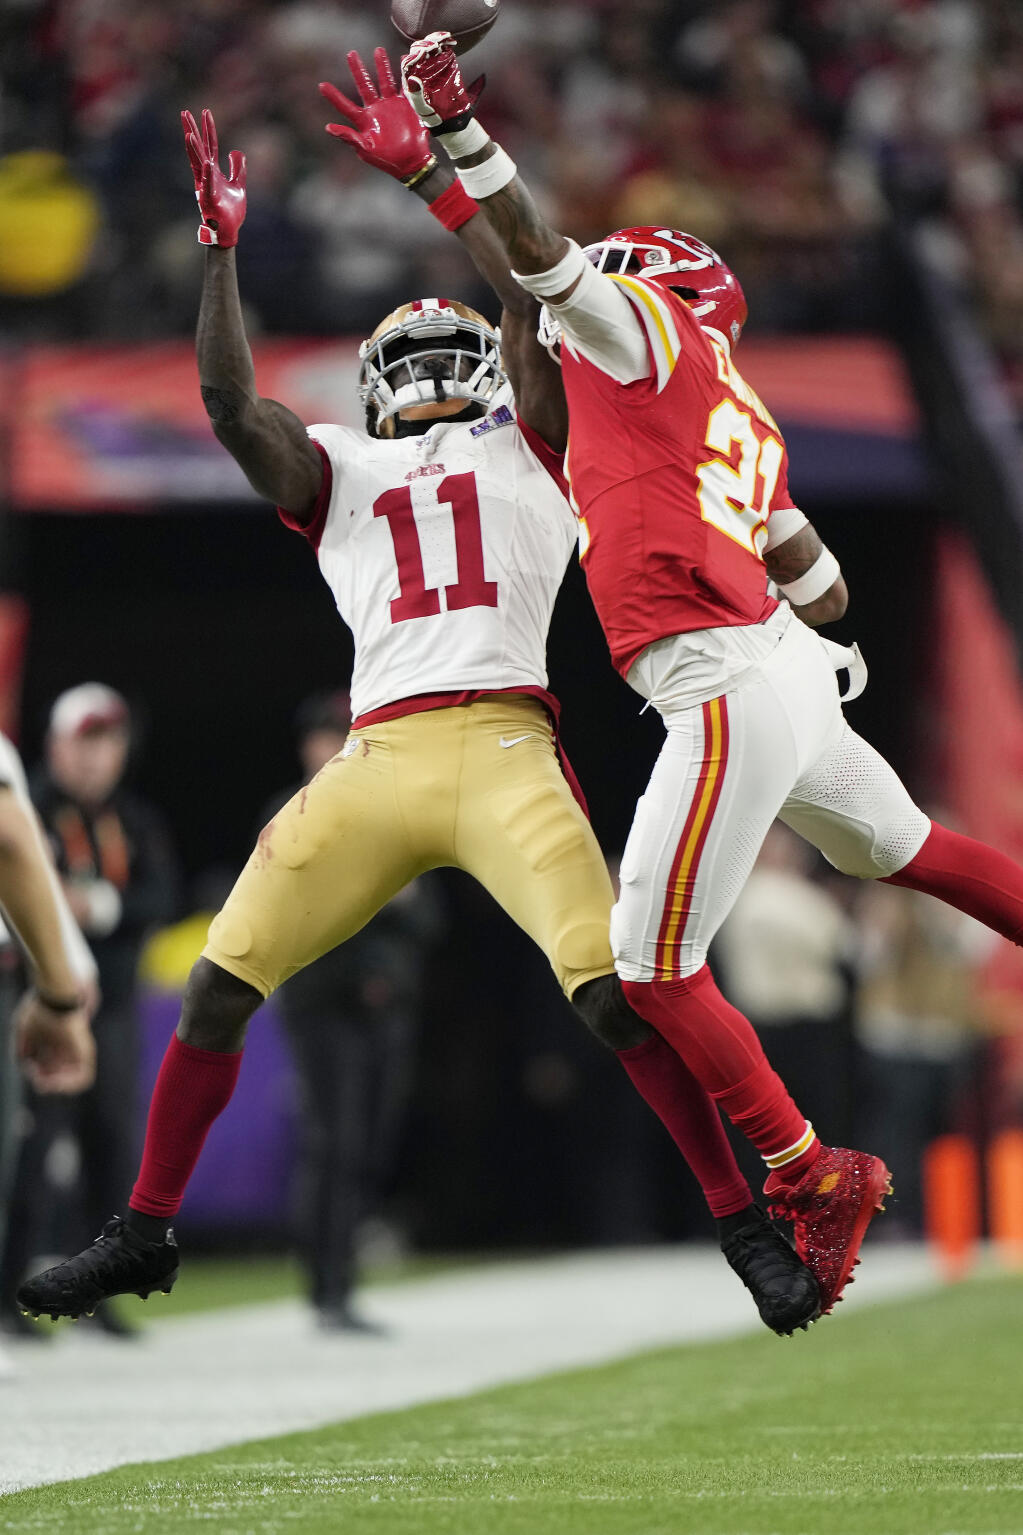 Kansas City Chiefs safety Mike Edwards (21) knocks away a pass to San Francisco 49ers wide receiver Brandon Aiyuk (11) during the NFL Super Bowl 58 football game Sunday, Feb. 11, 2024, in Las Vegas. The Chiefs defeated the 49ers 25-22 in overtime.(AP Photo/Doug Benc)